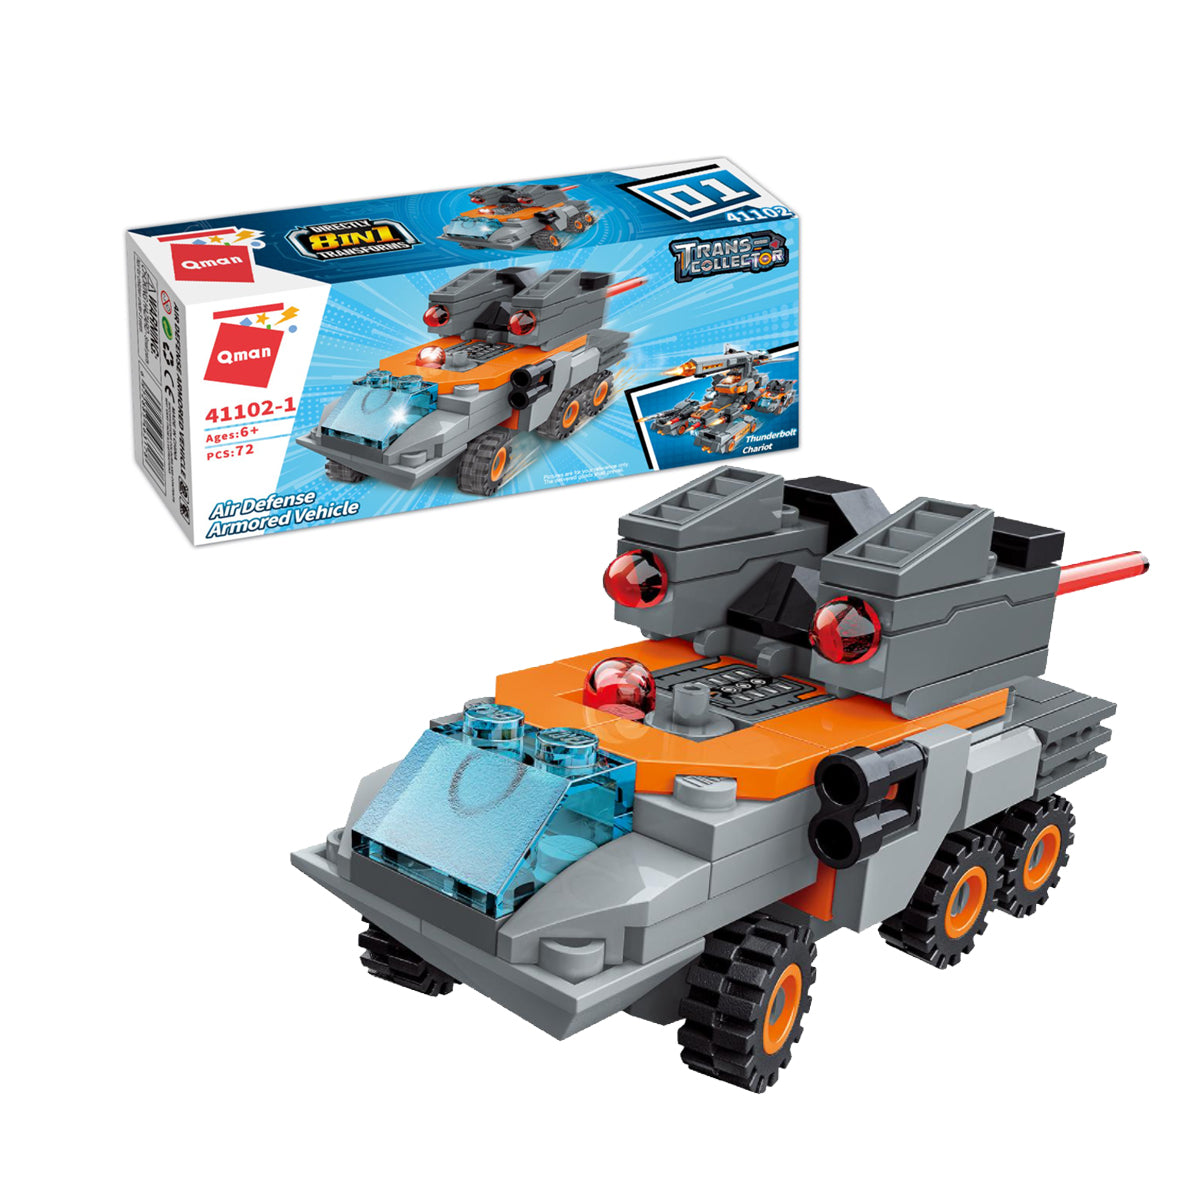 Qman Trans-Collector Thunderbolt Chariot 8 in 1: Air Defense Armored Vehicle (7681412759776)